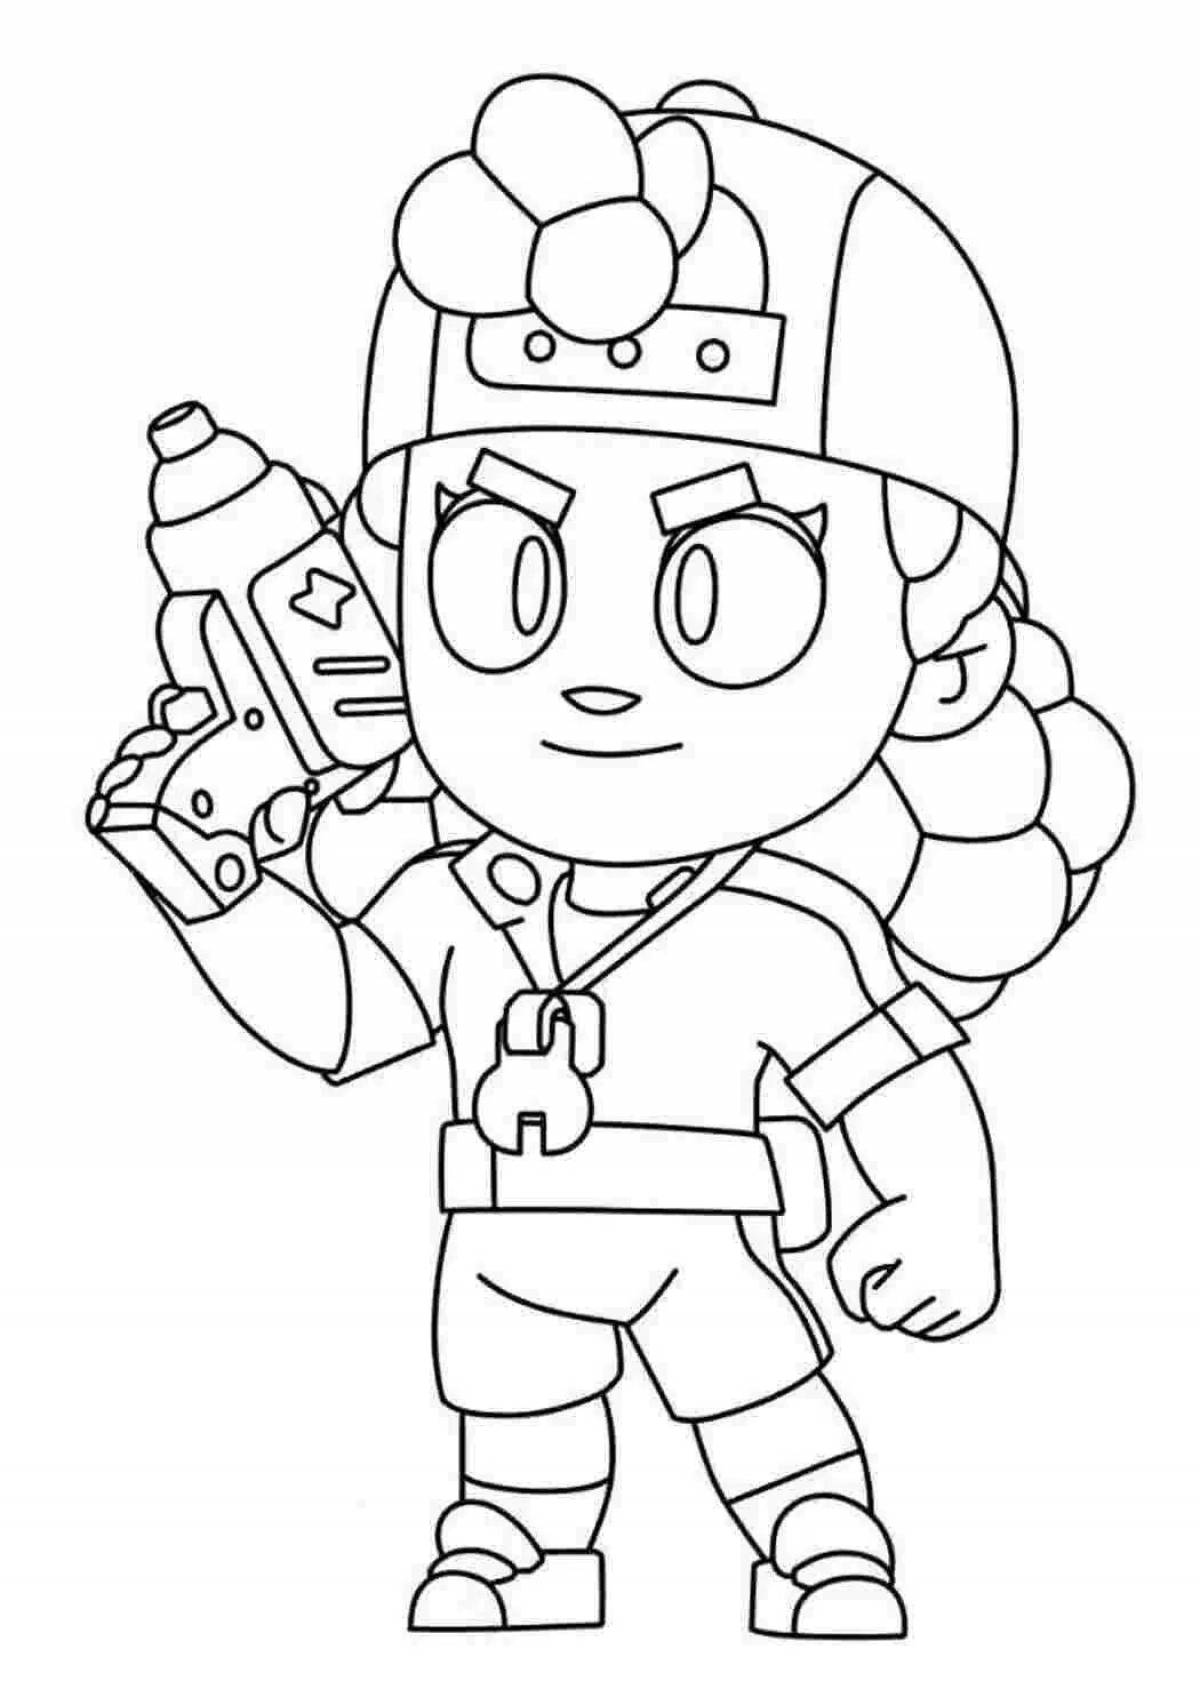 Coloring book adorable major rico from bravo stars